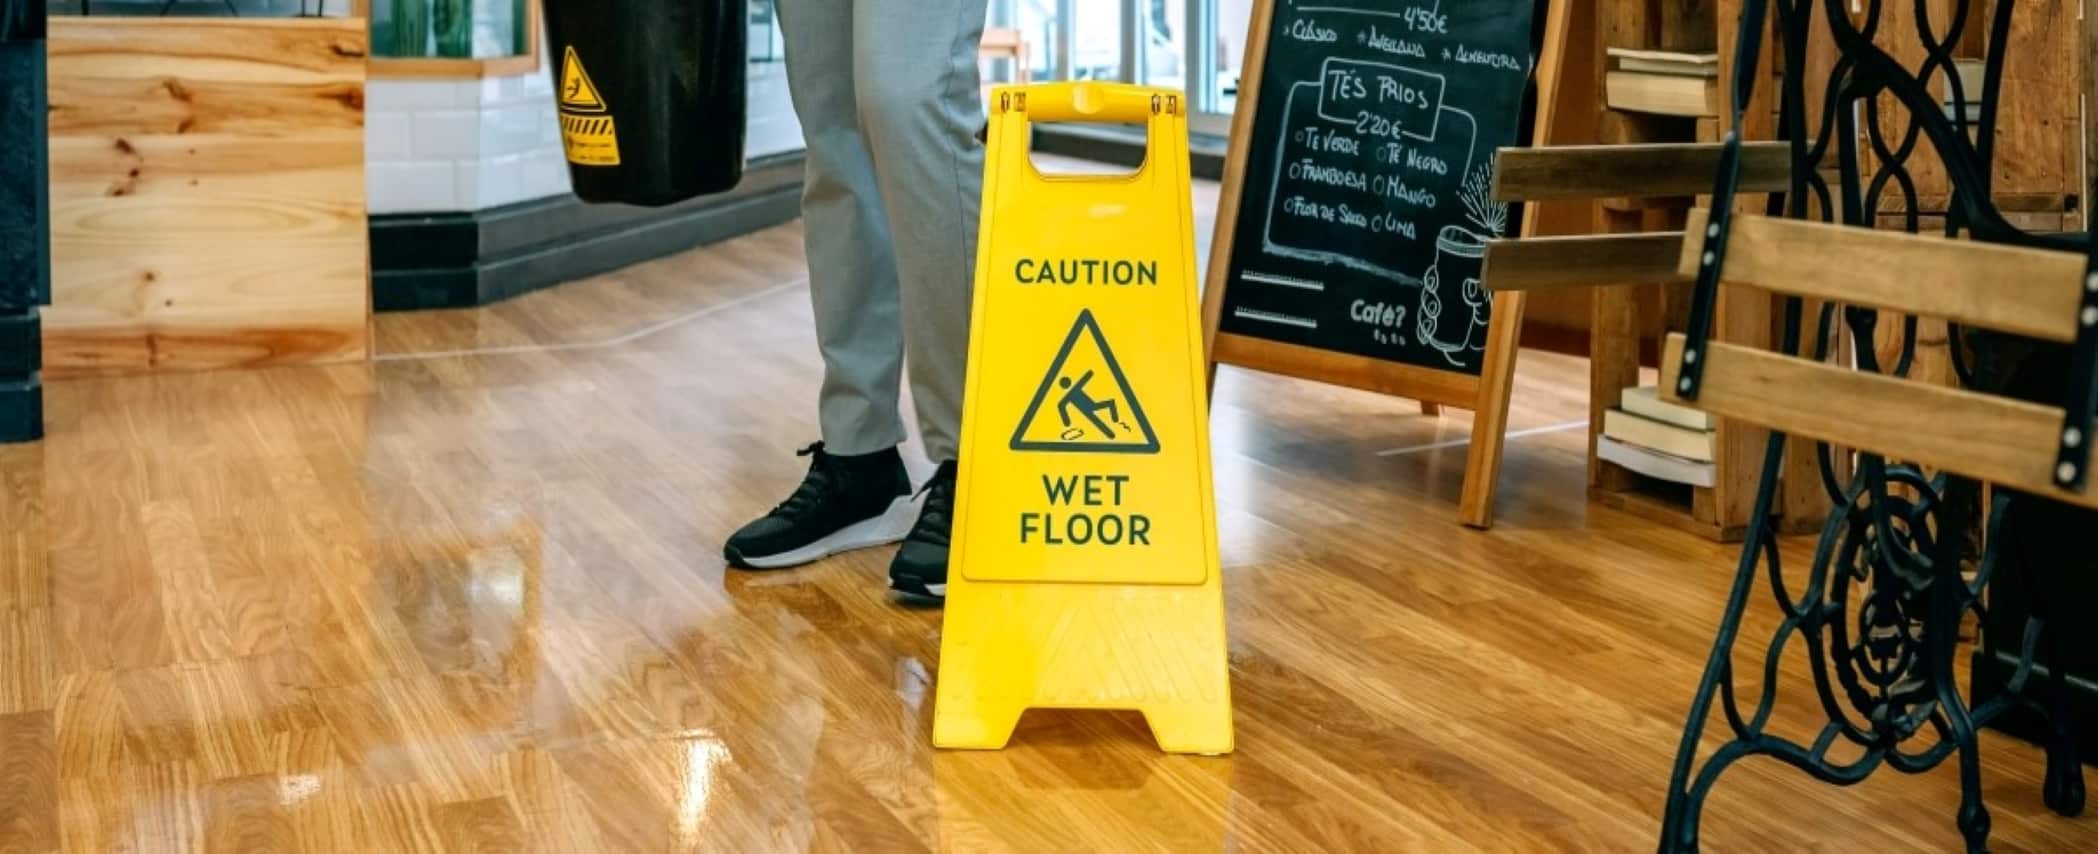 worker-placing-wet-floor-sign-after-mopping-2021-08-29-10-59-42-utc